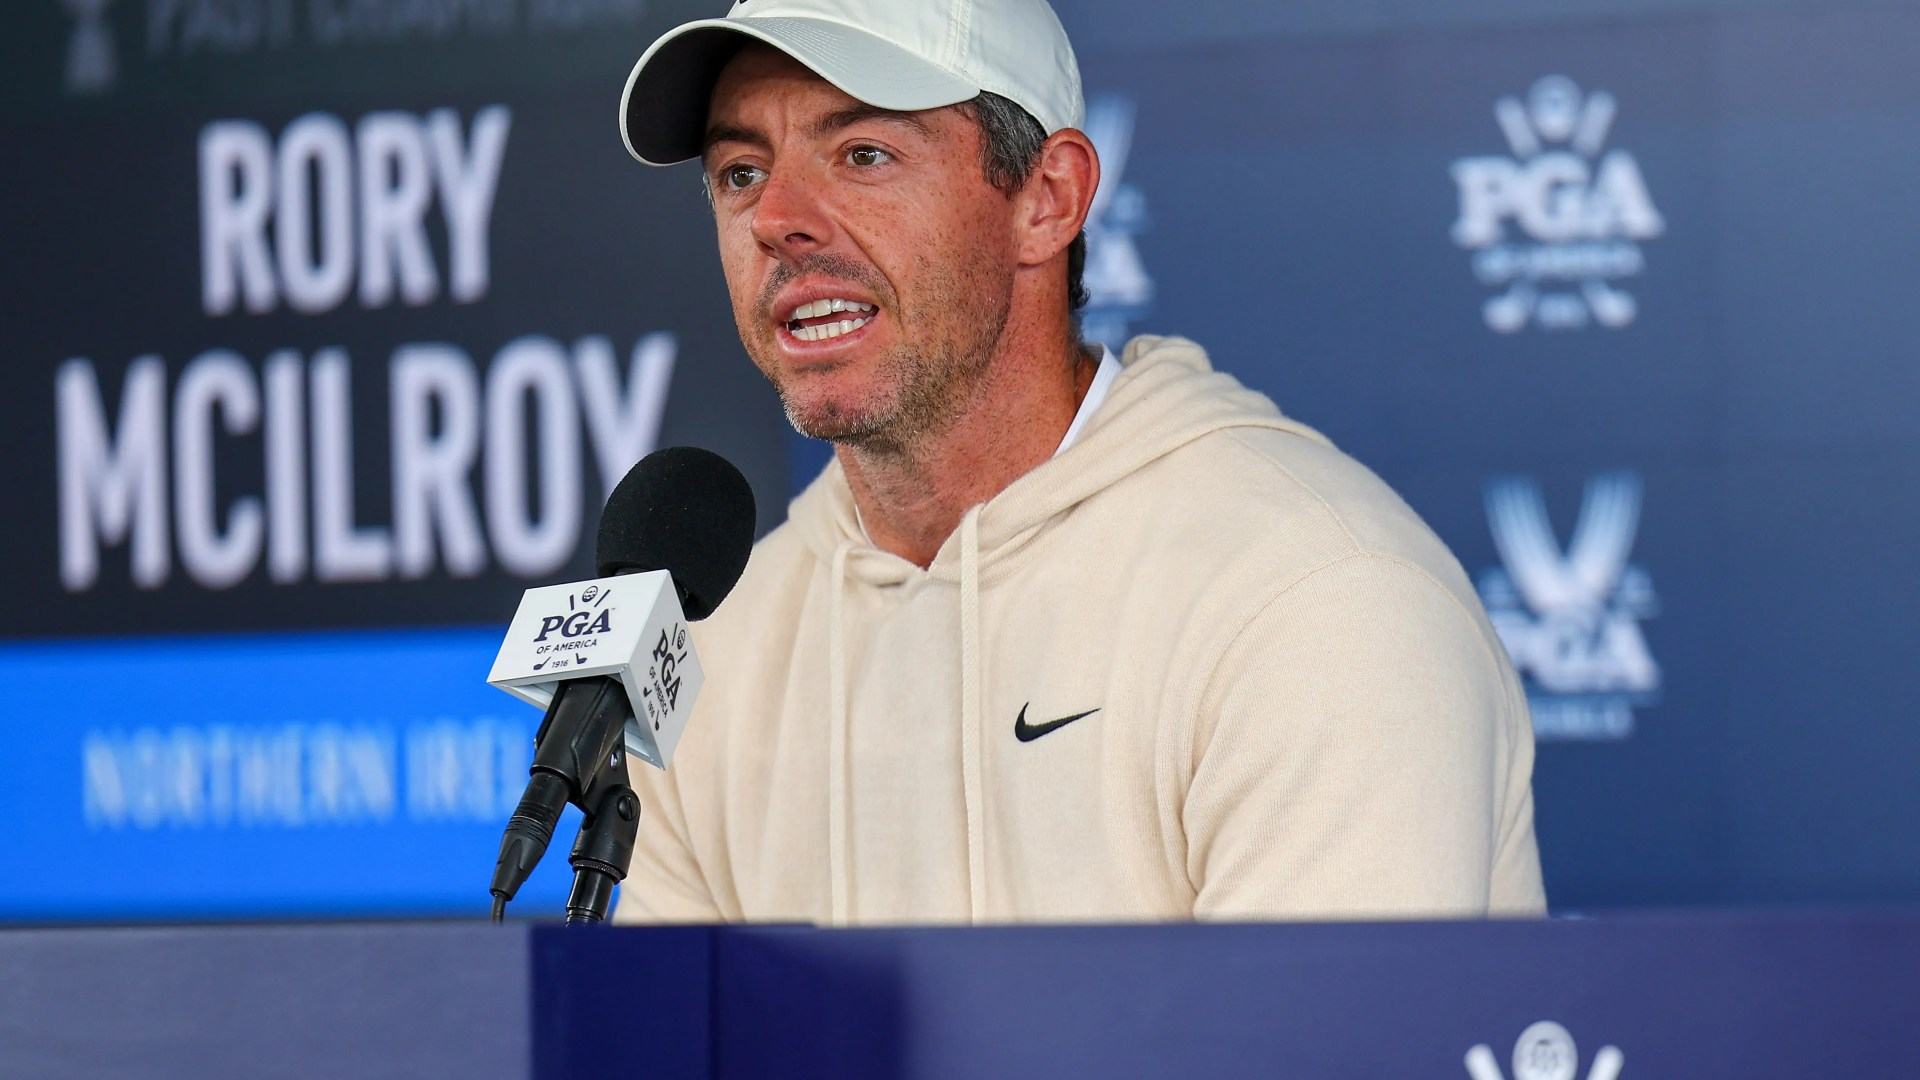 Rory McIlroy issues six-word response to ‘personal’ question following divorce news ahead of PGA Championship [Video]